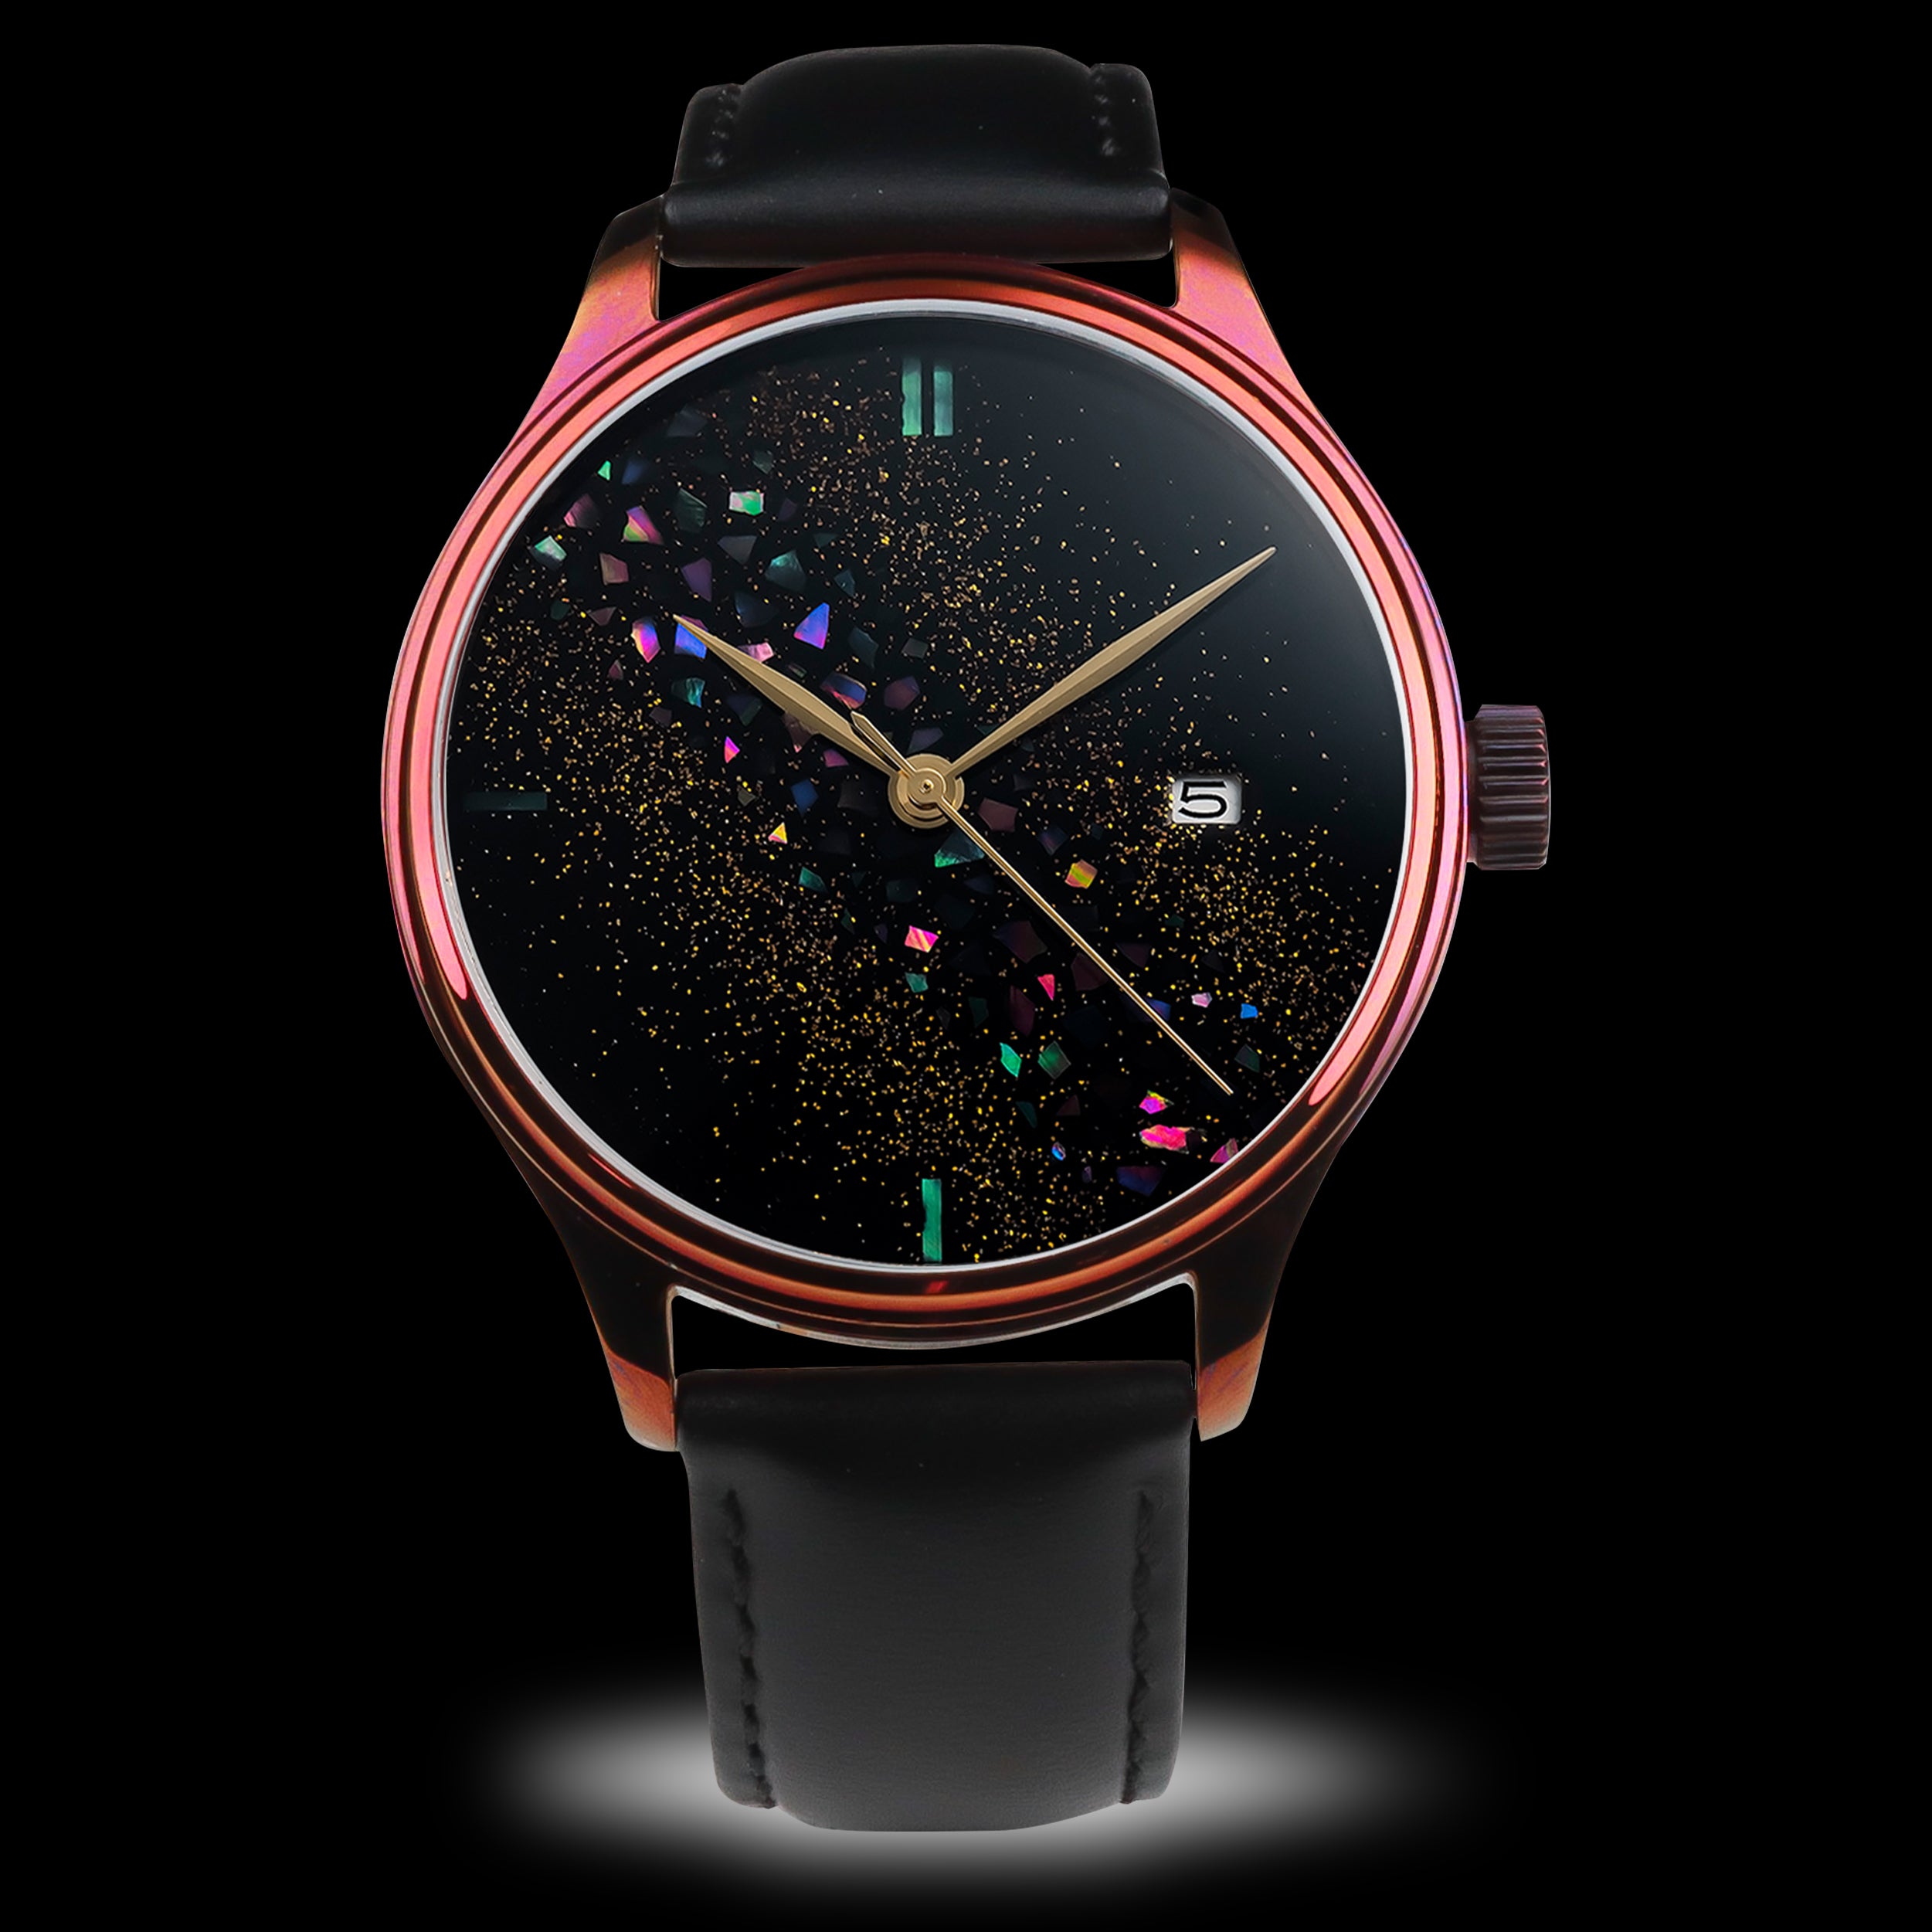 Dream Watch - Raden - Wancher Watch Wancher Watch Colored (+$50) Wancher Watch Dream Watch - Raden {{ Automatic Watch {{ Watch }} }} {{ Japan }} Wancher Dream Watch - Raden, featuring a beautifully crafted Raden Urushi dial with a shining, iridescent finish. The watch is powered by Miyota 9015 Mechanical Movement and features a Domed Sapphire Glass and Genuine Cowhide/Galuchat strap